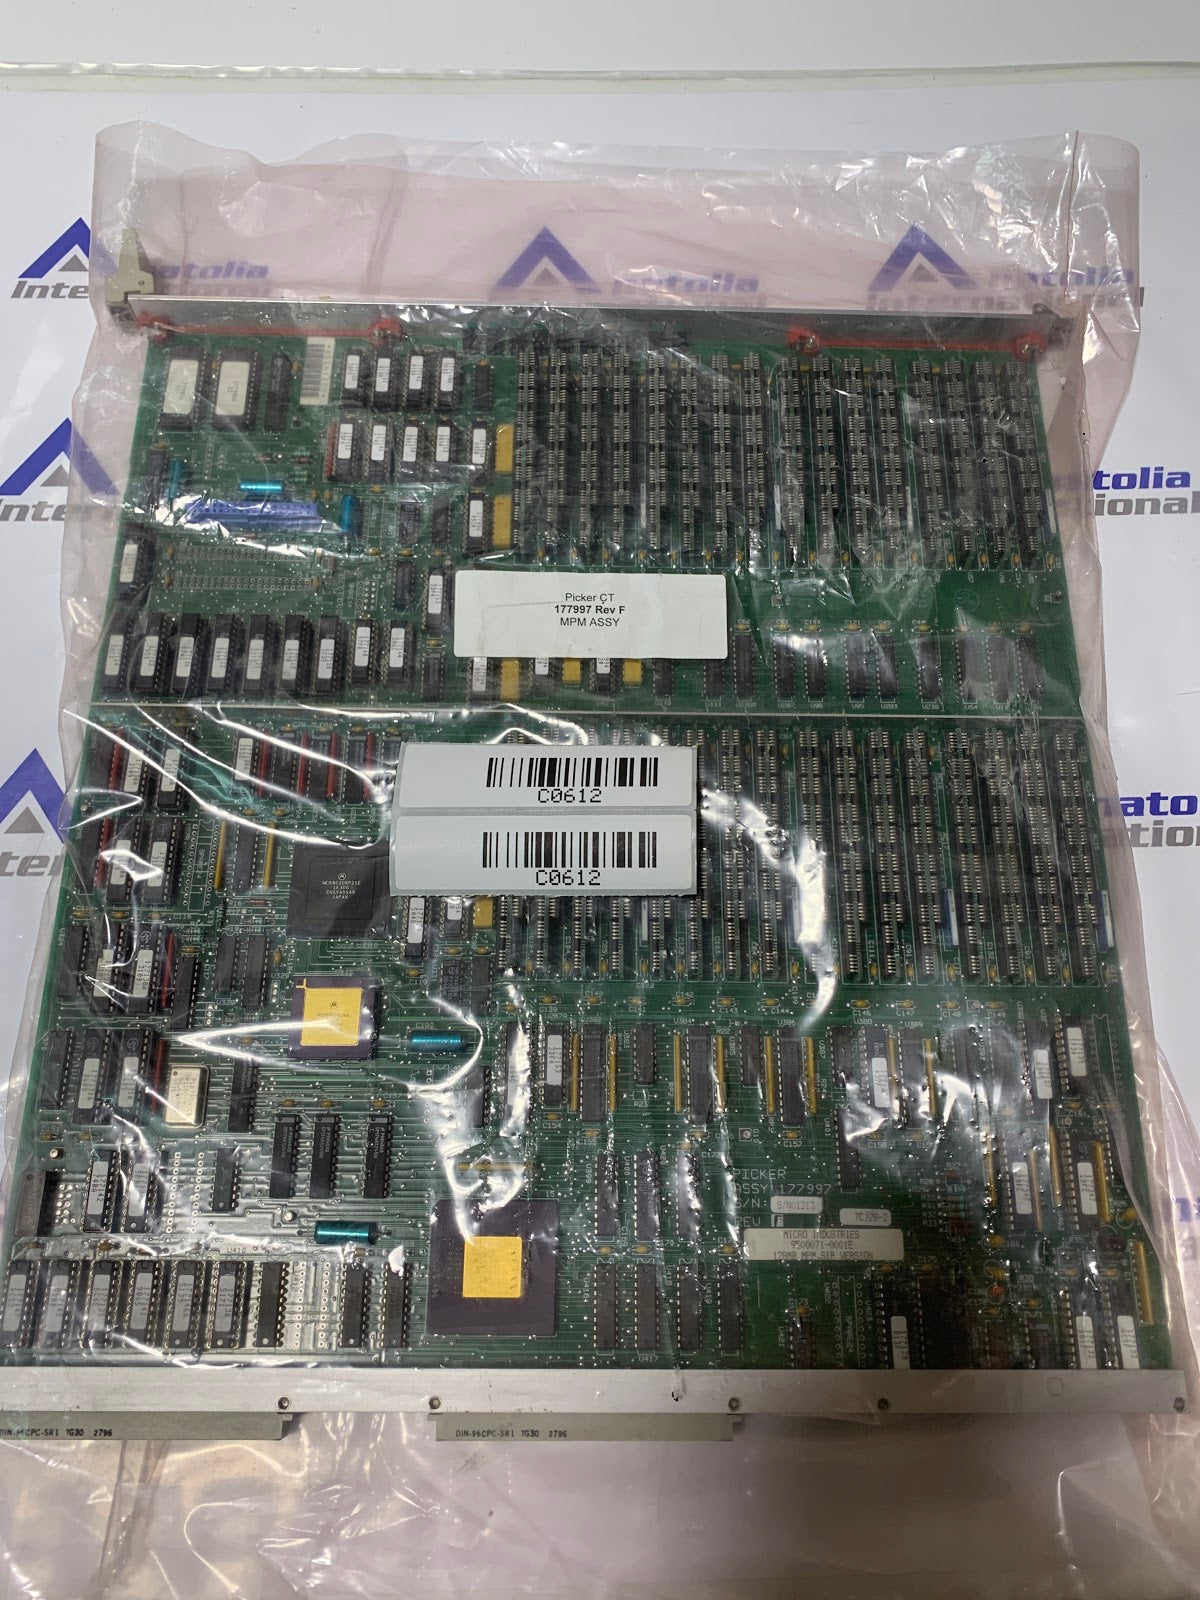 MPM ASSY For OtherPicker CT P/N:177997 Rev F. Pulled from functioning Equipment, contact for more info.